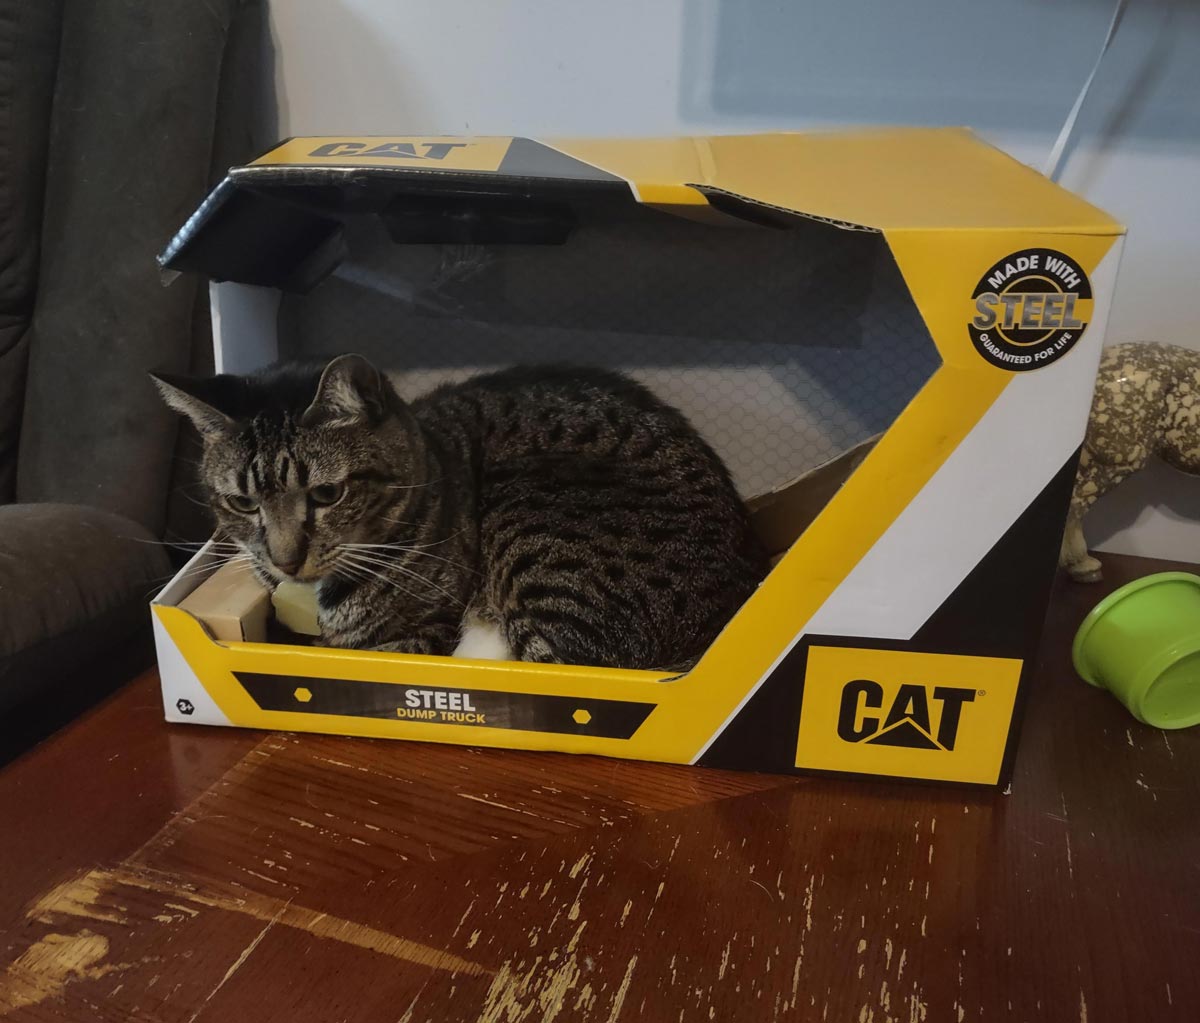 Perfect box for my CAT